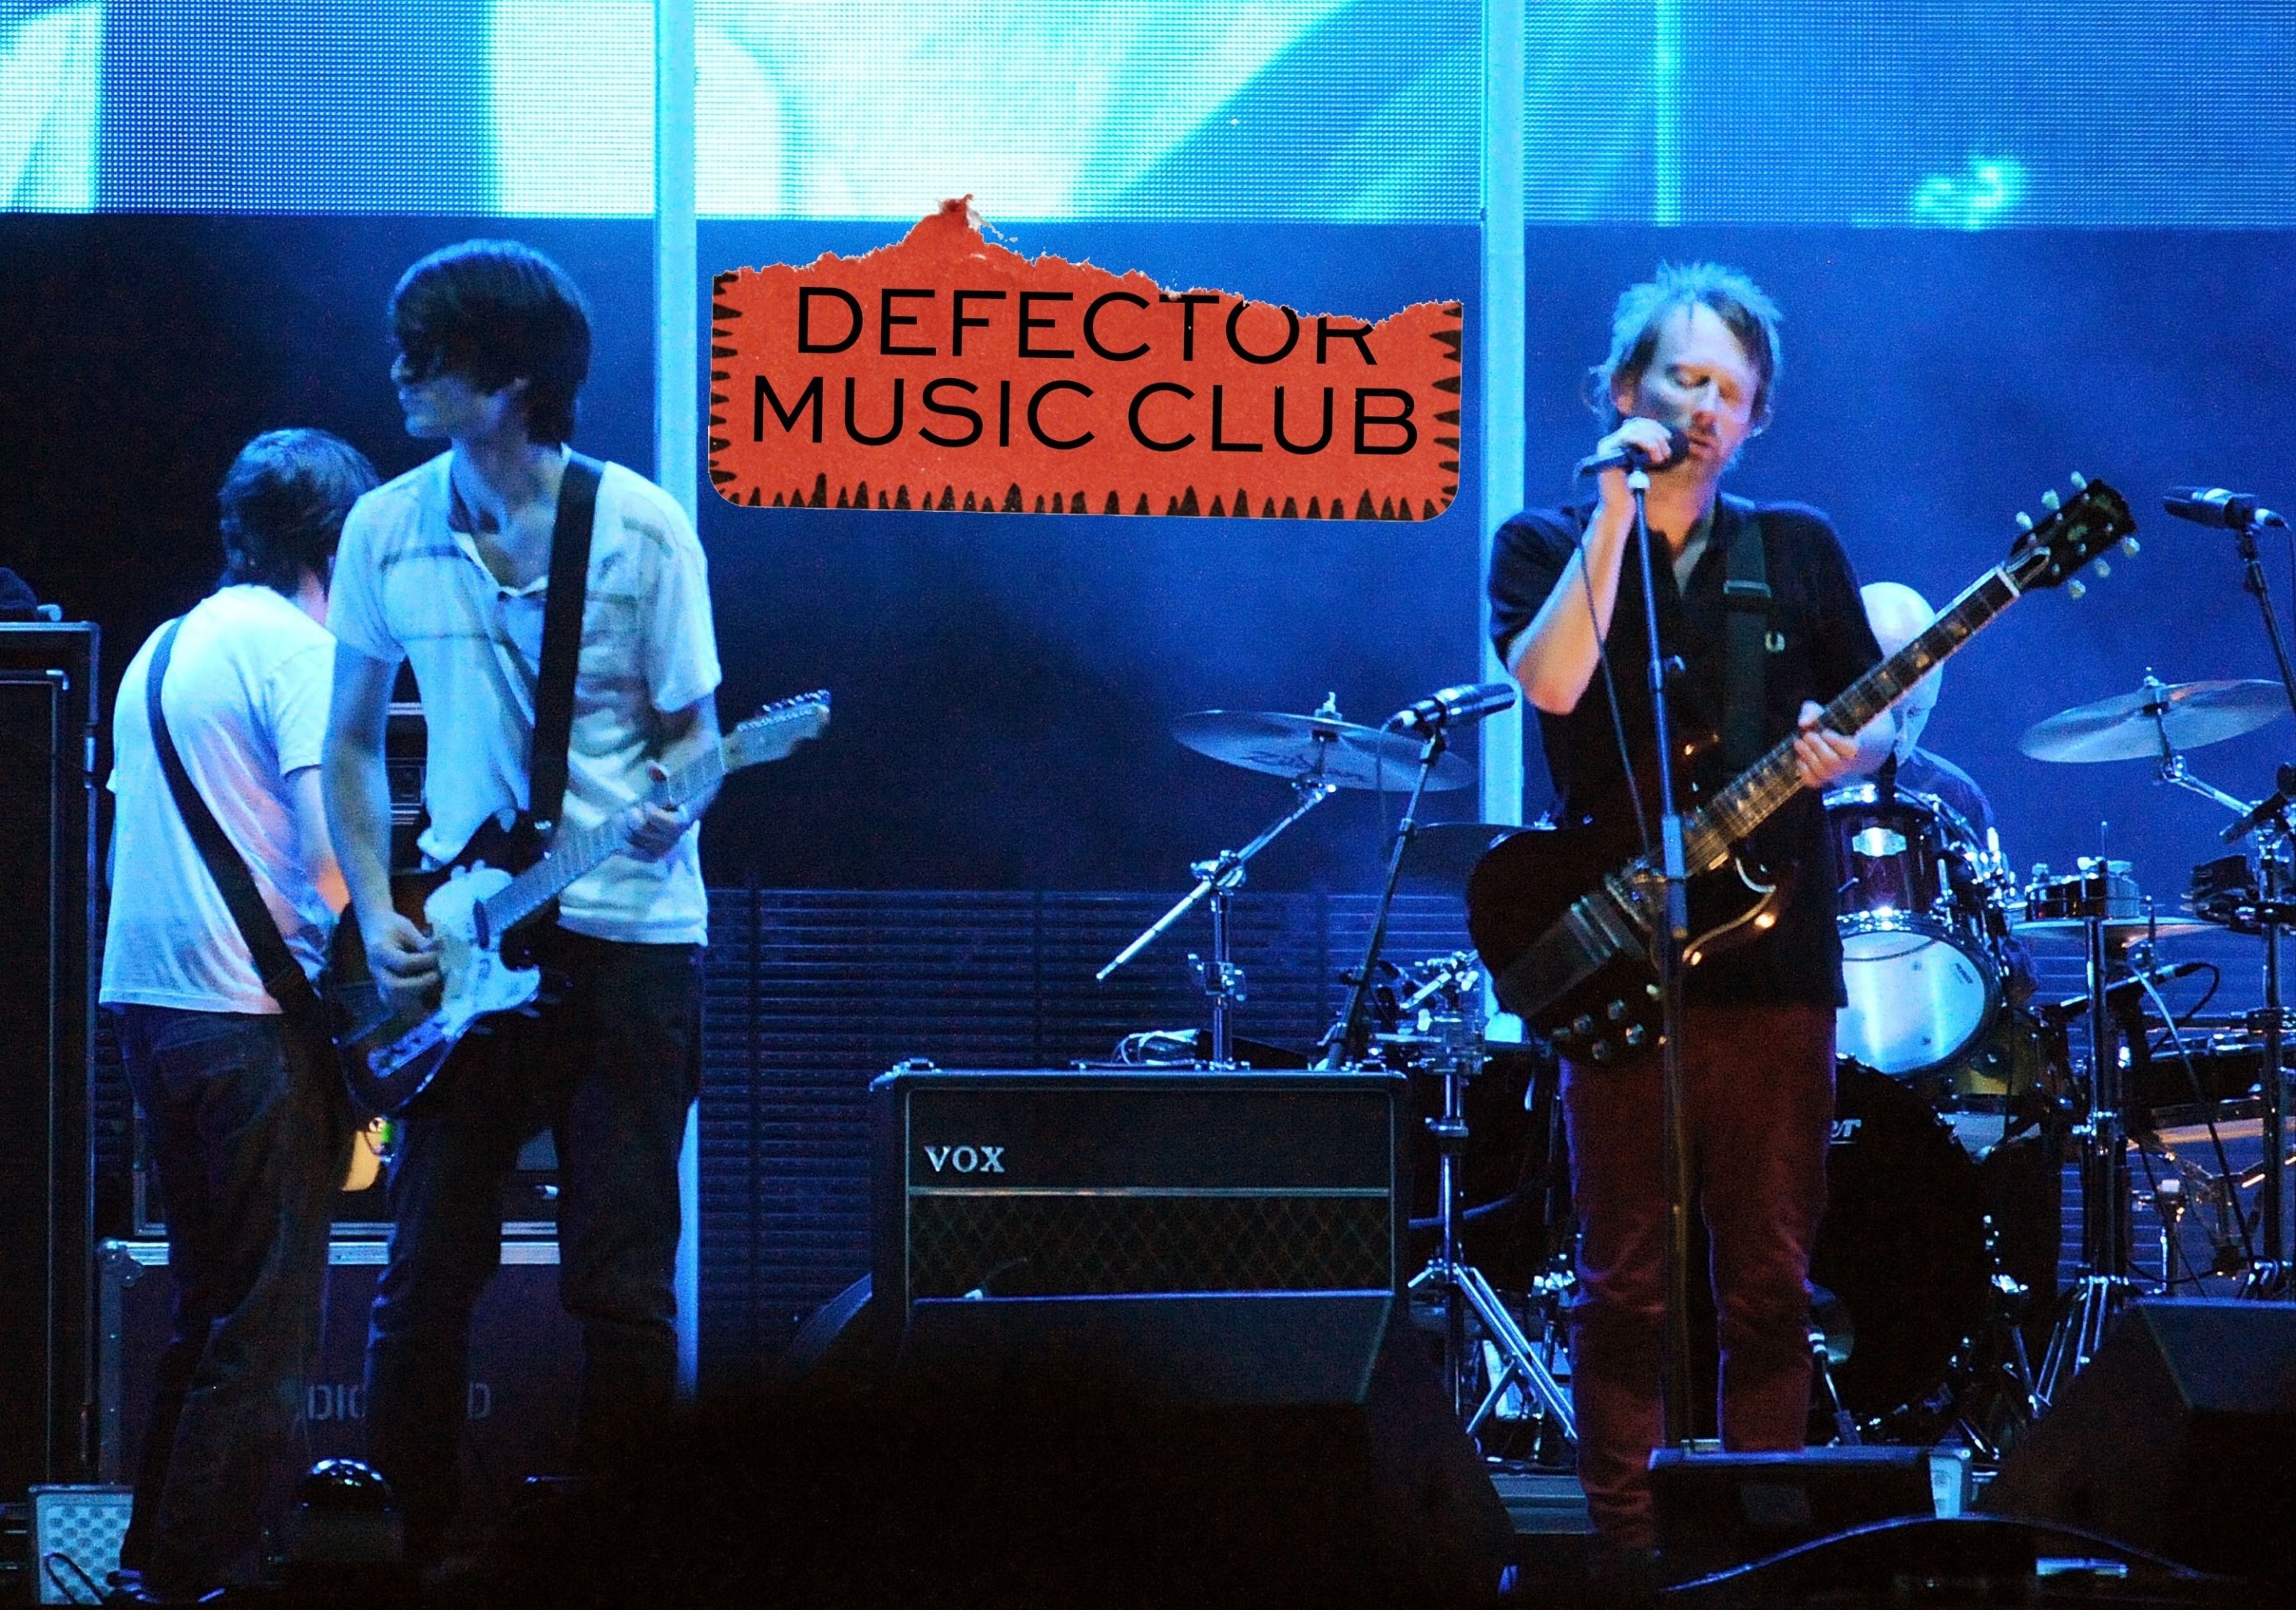 Radiohead performing onstage in support of their 2007 album "In Rainbows," with the Defector Music Club logo right in the middle.